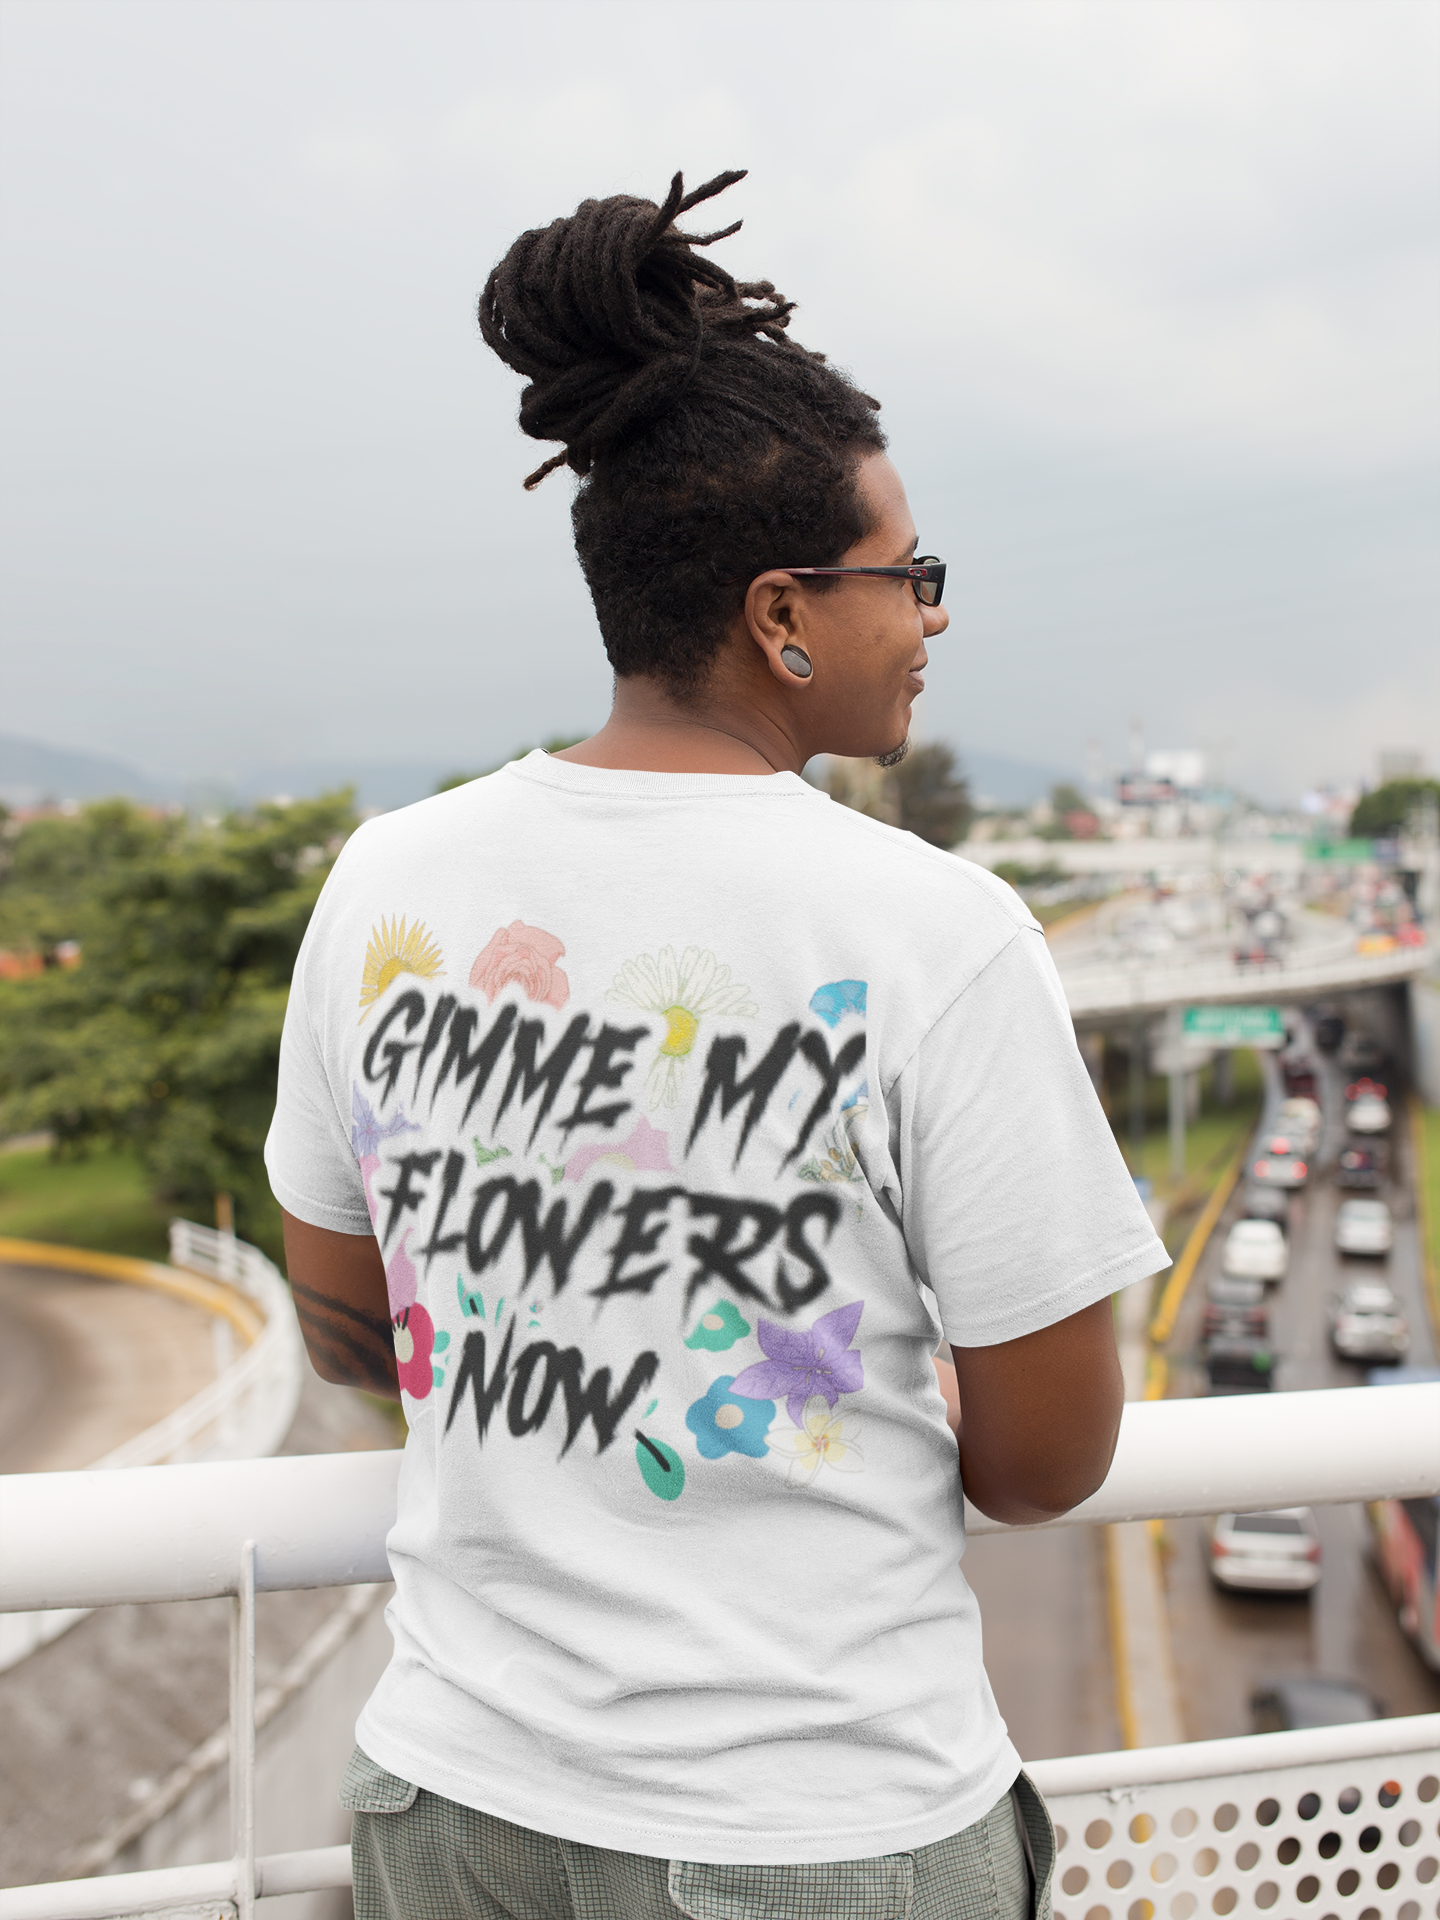 "Gimme my flowers Now" T shirt